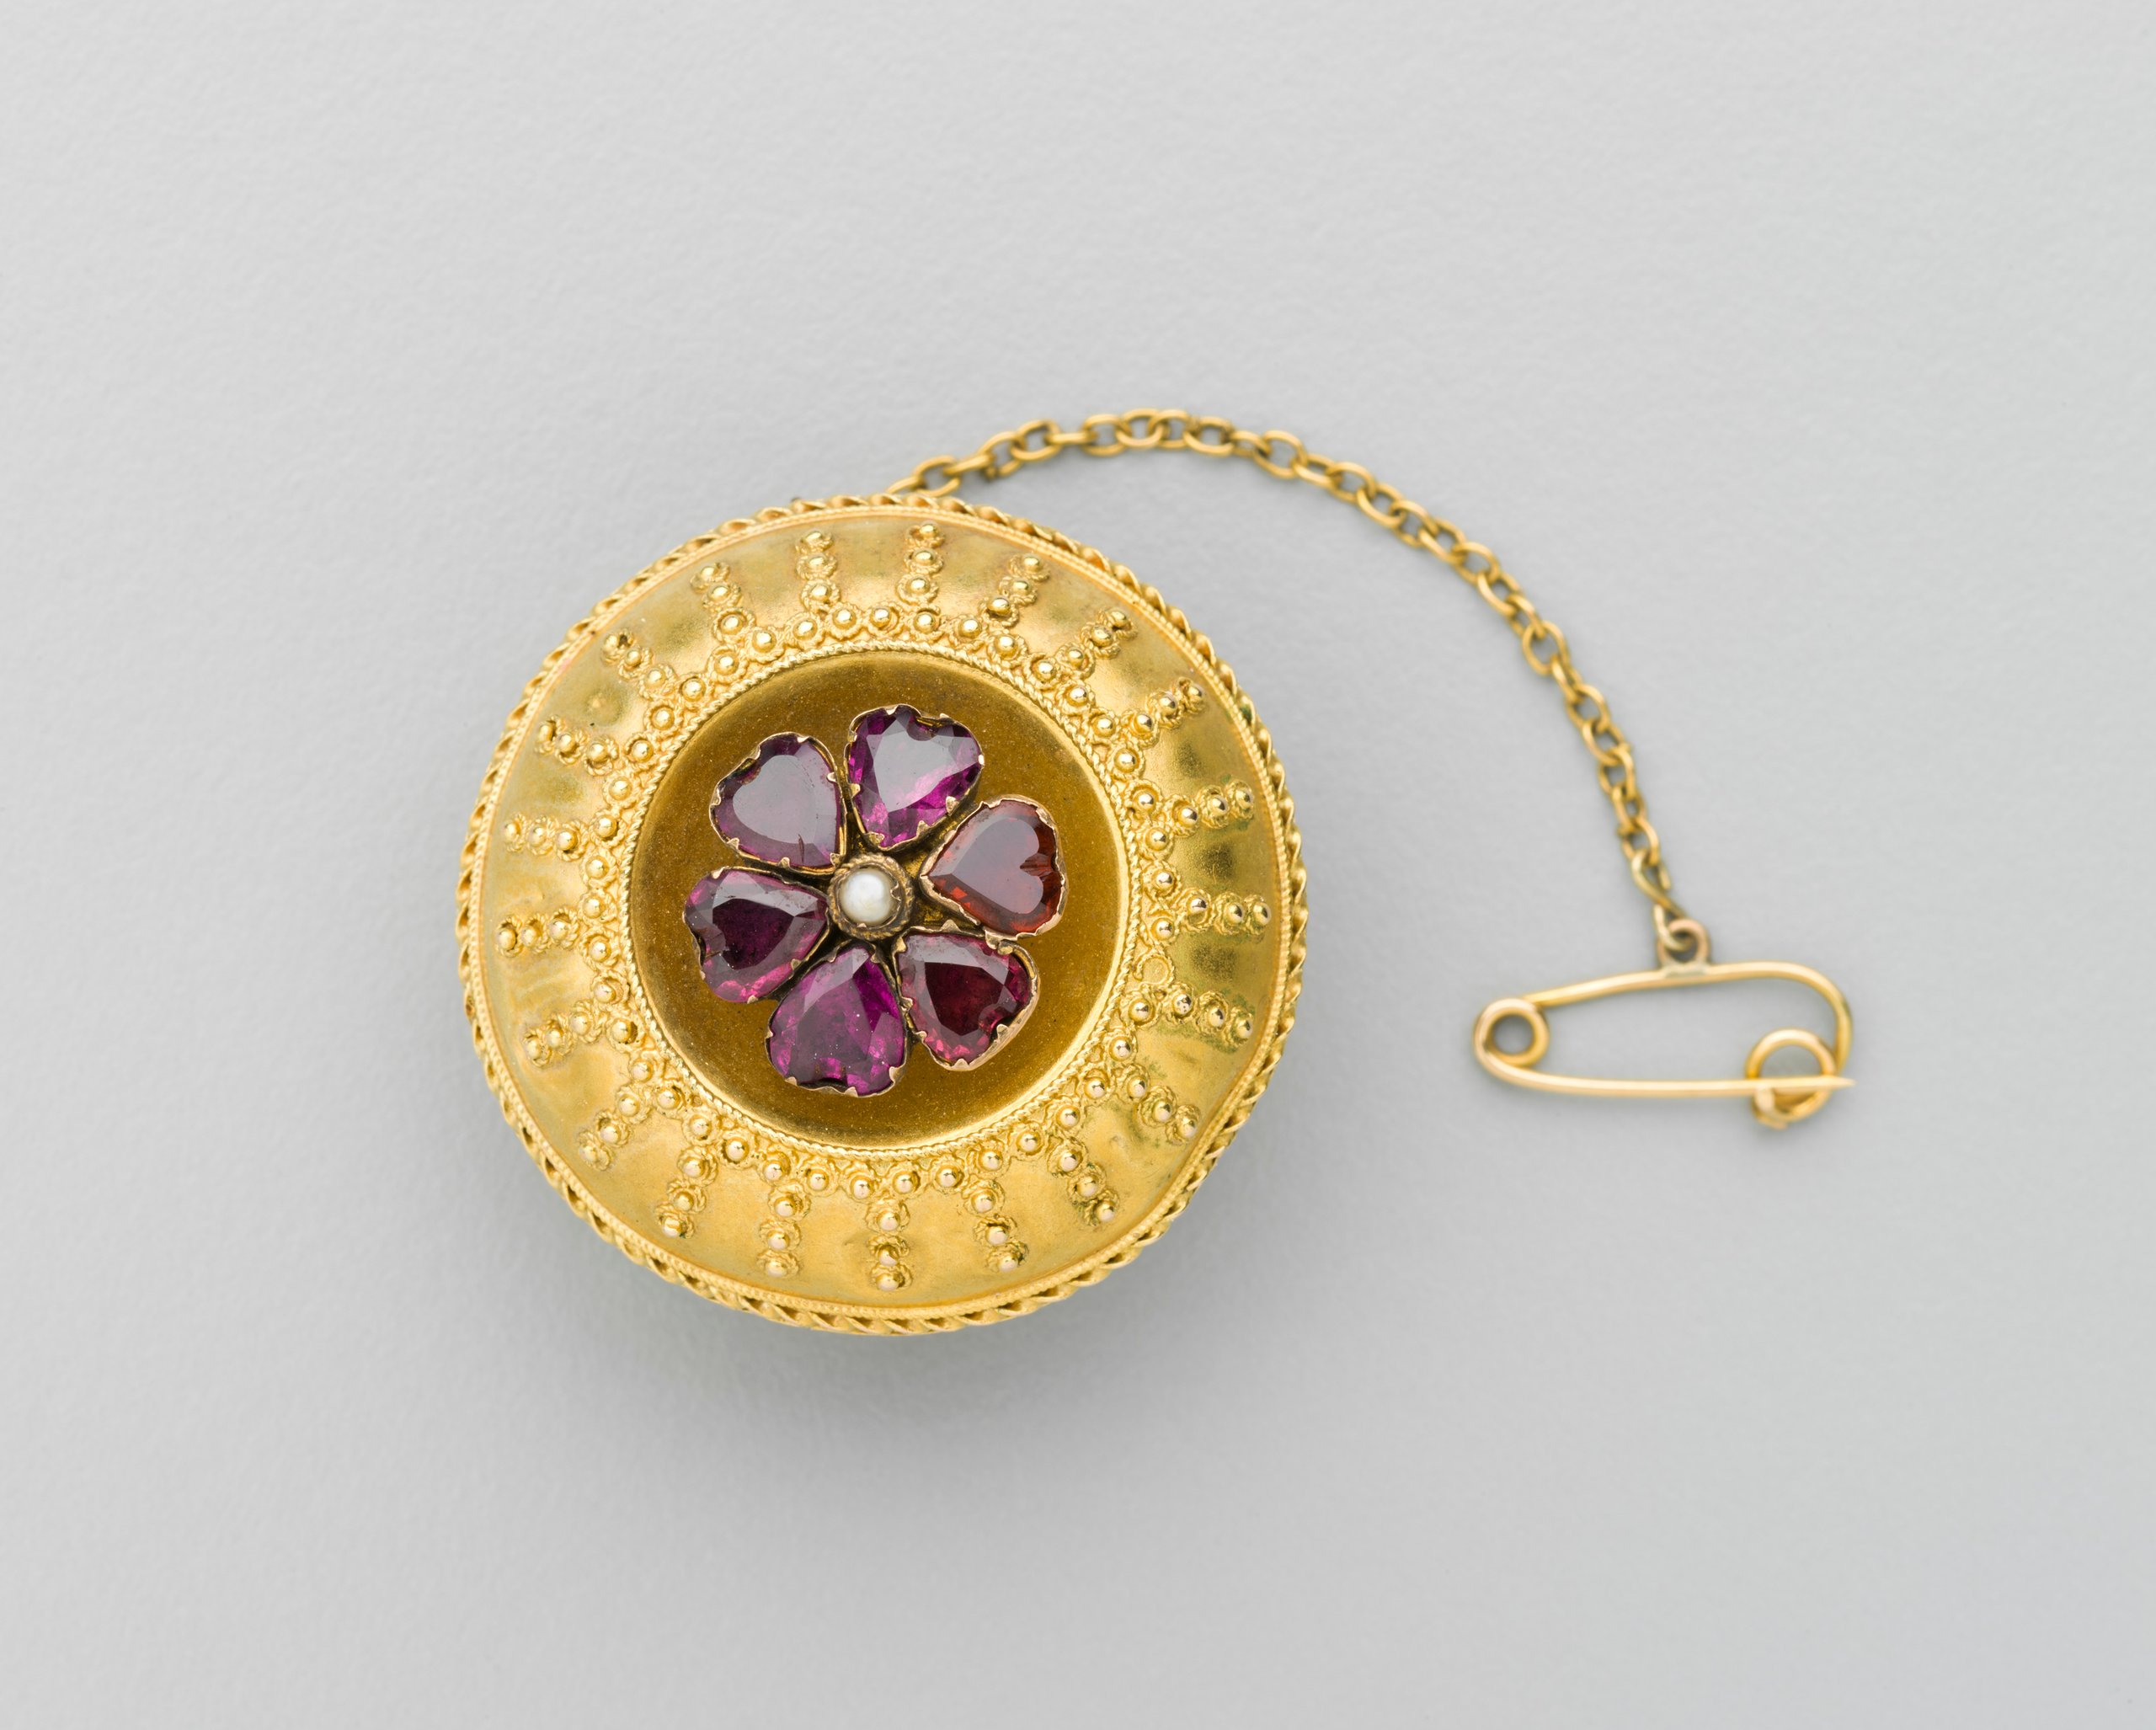 Gold brooch with amethyst and pearl decoration